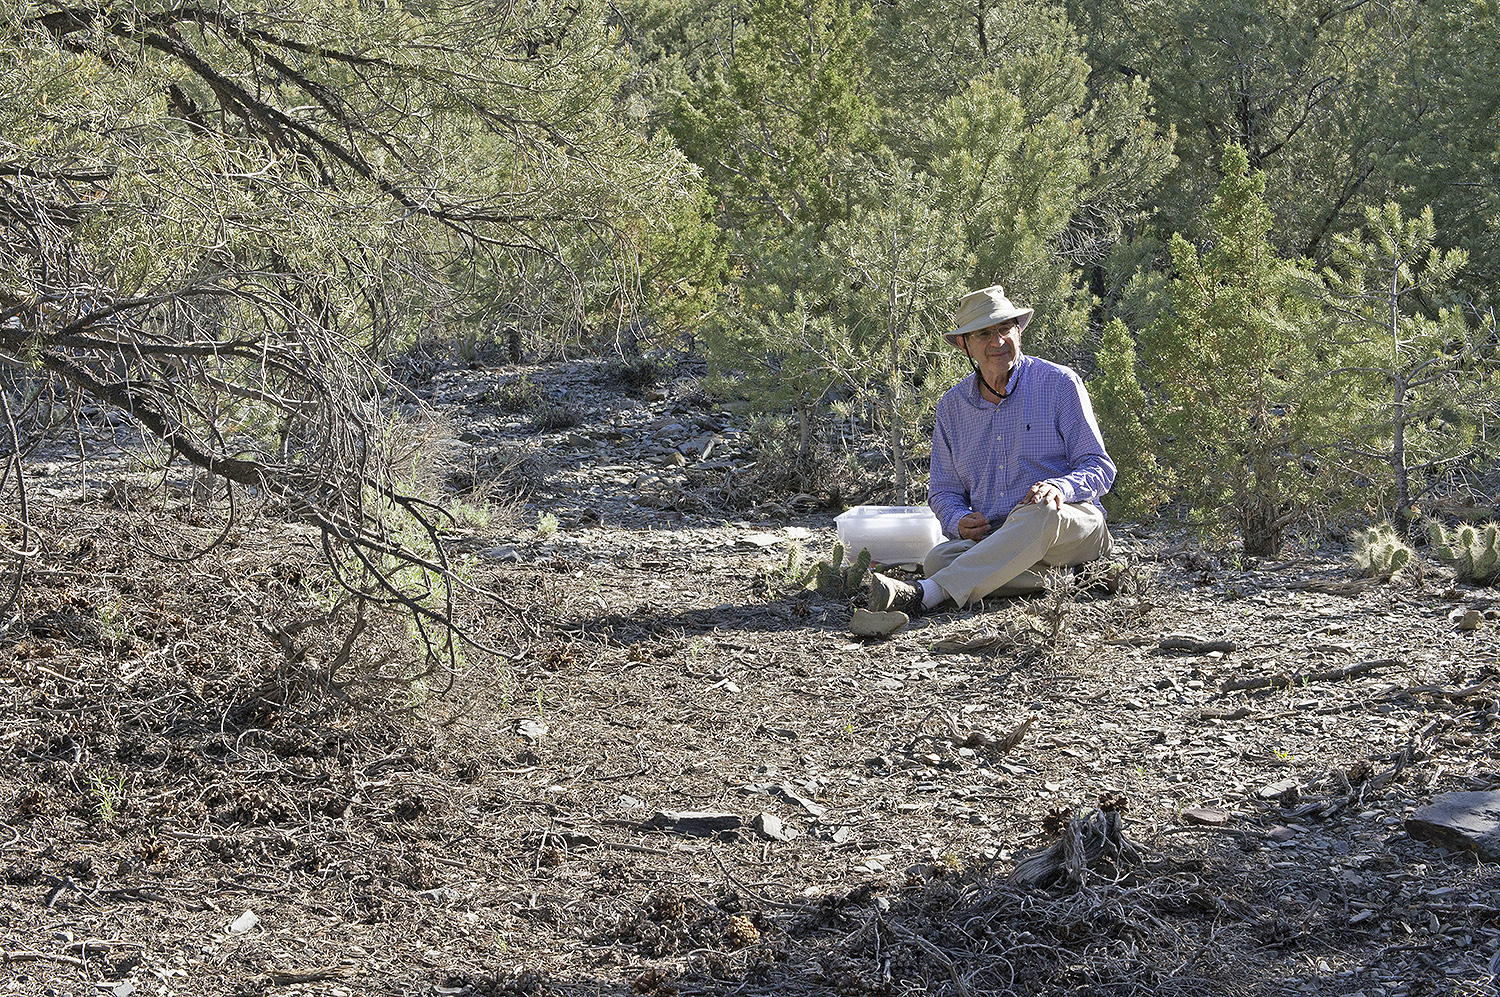 Fred Cohan samples the rhizospheres of Opuntia, or prickly pear cactus, at about 7,000 feet.